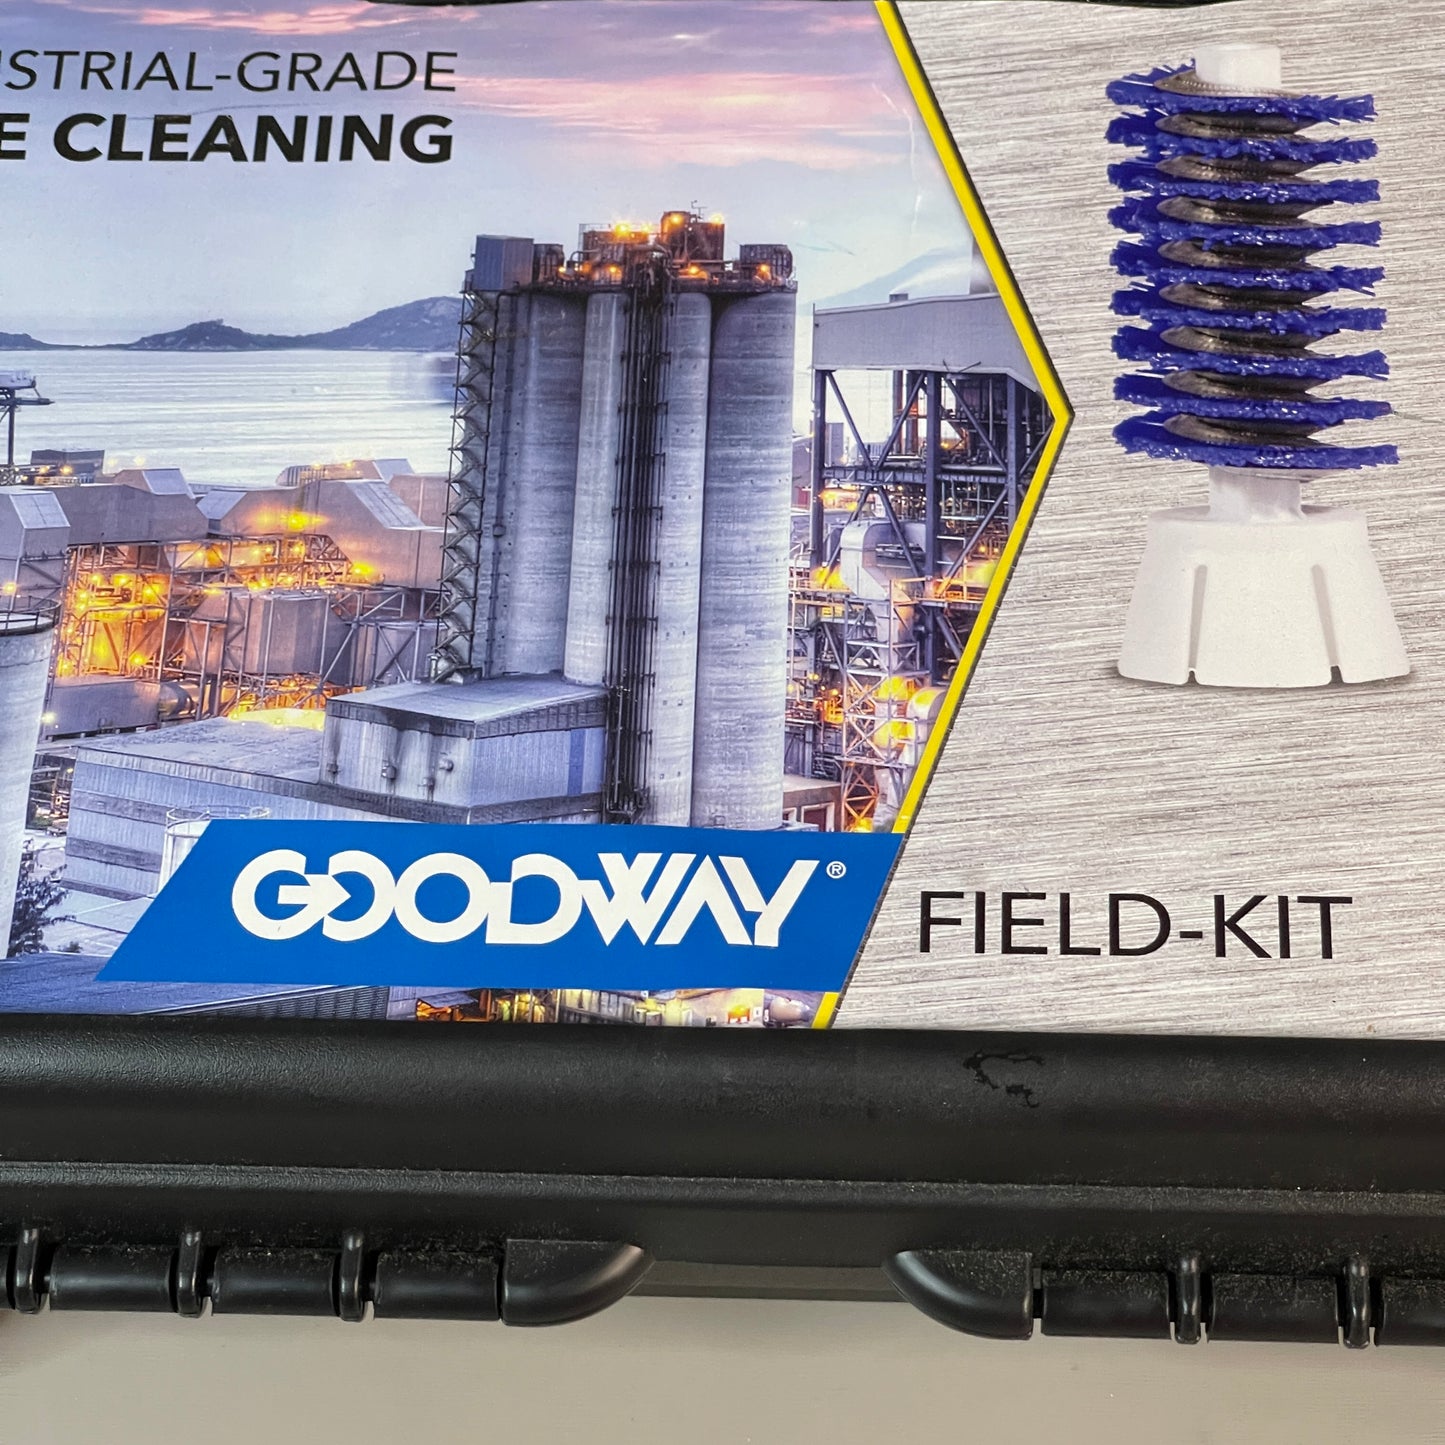 GOODWAY Industrial-Grade Tube Cleaning Field Kit 20 Pieces W/ Case (New)